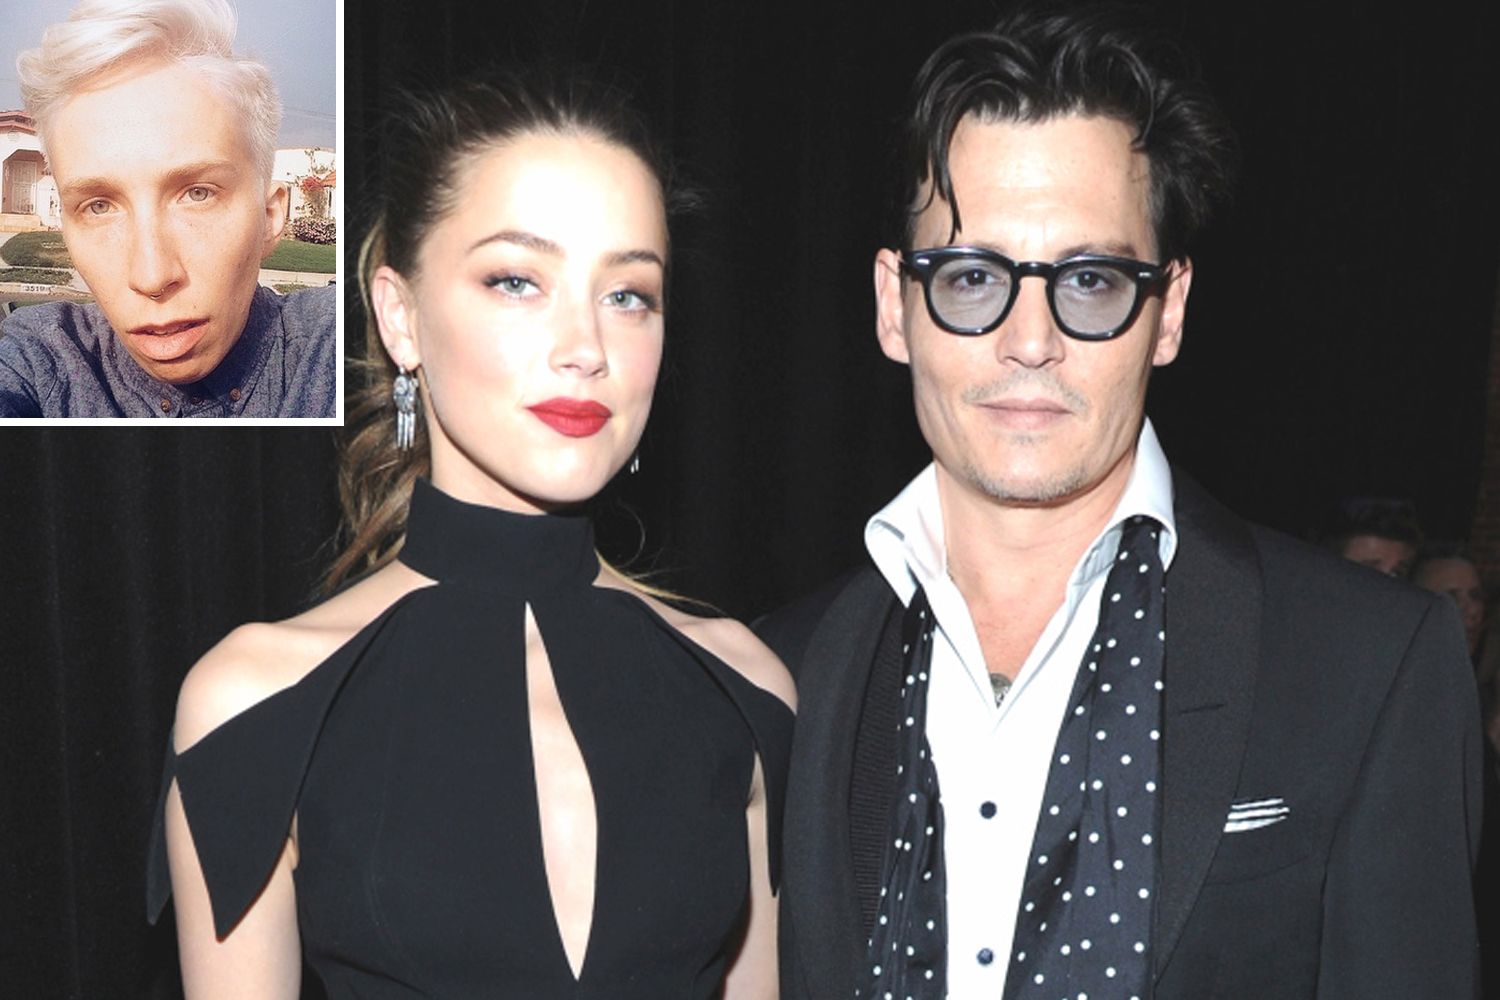 Mr. Depp pissed with Amber-Wright friendship?